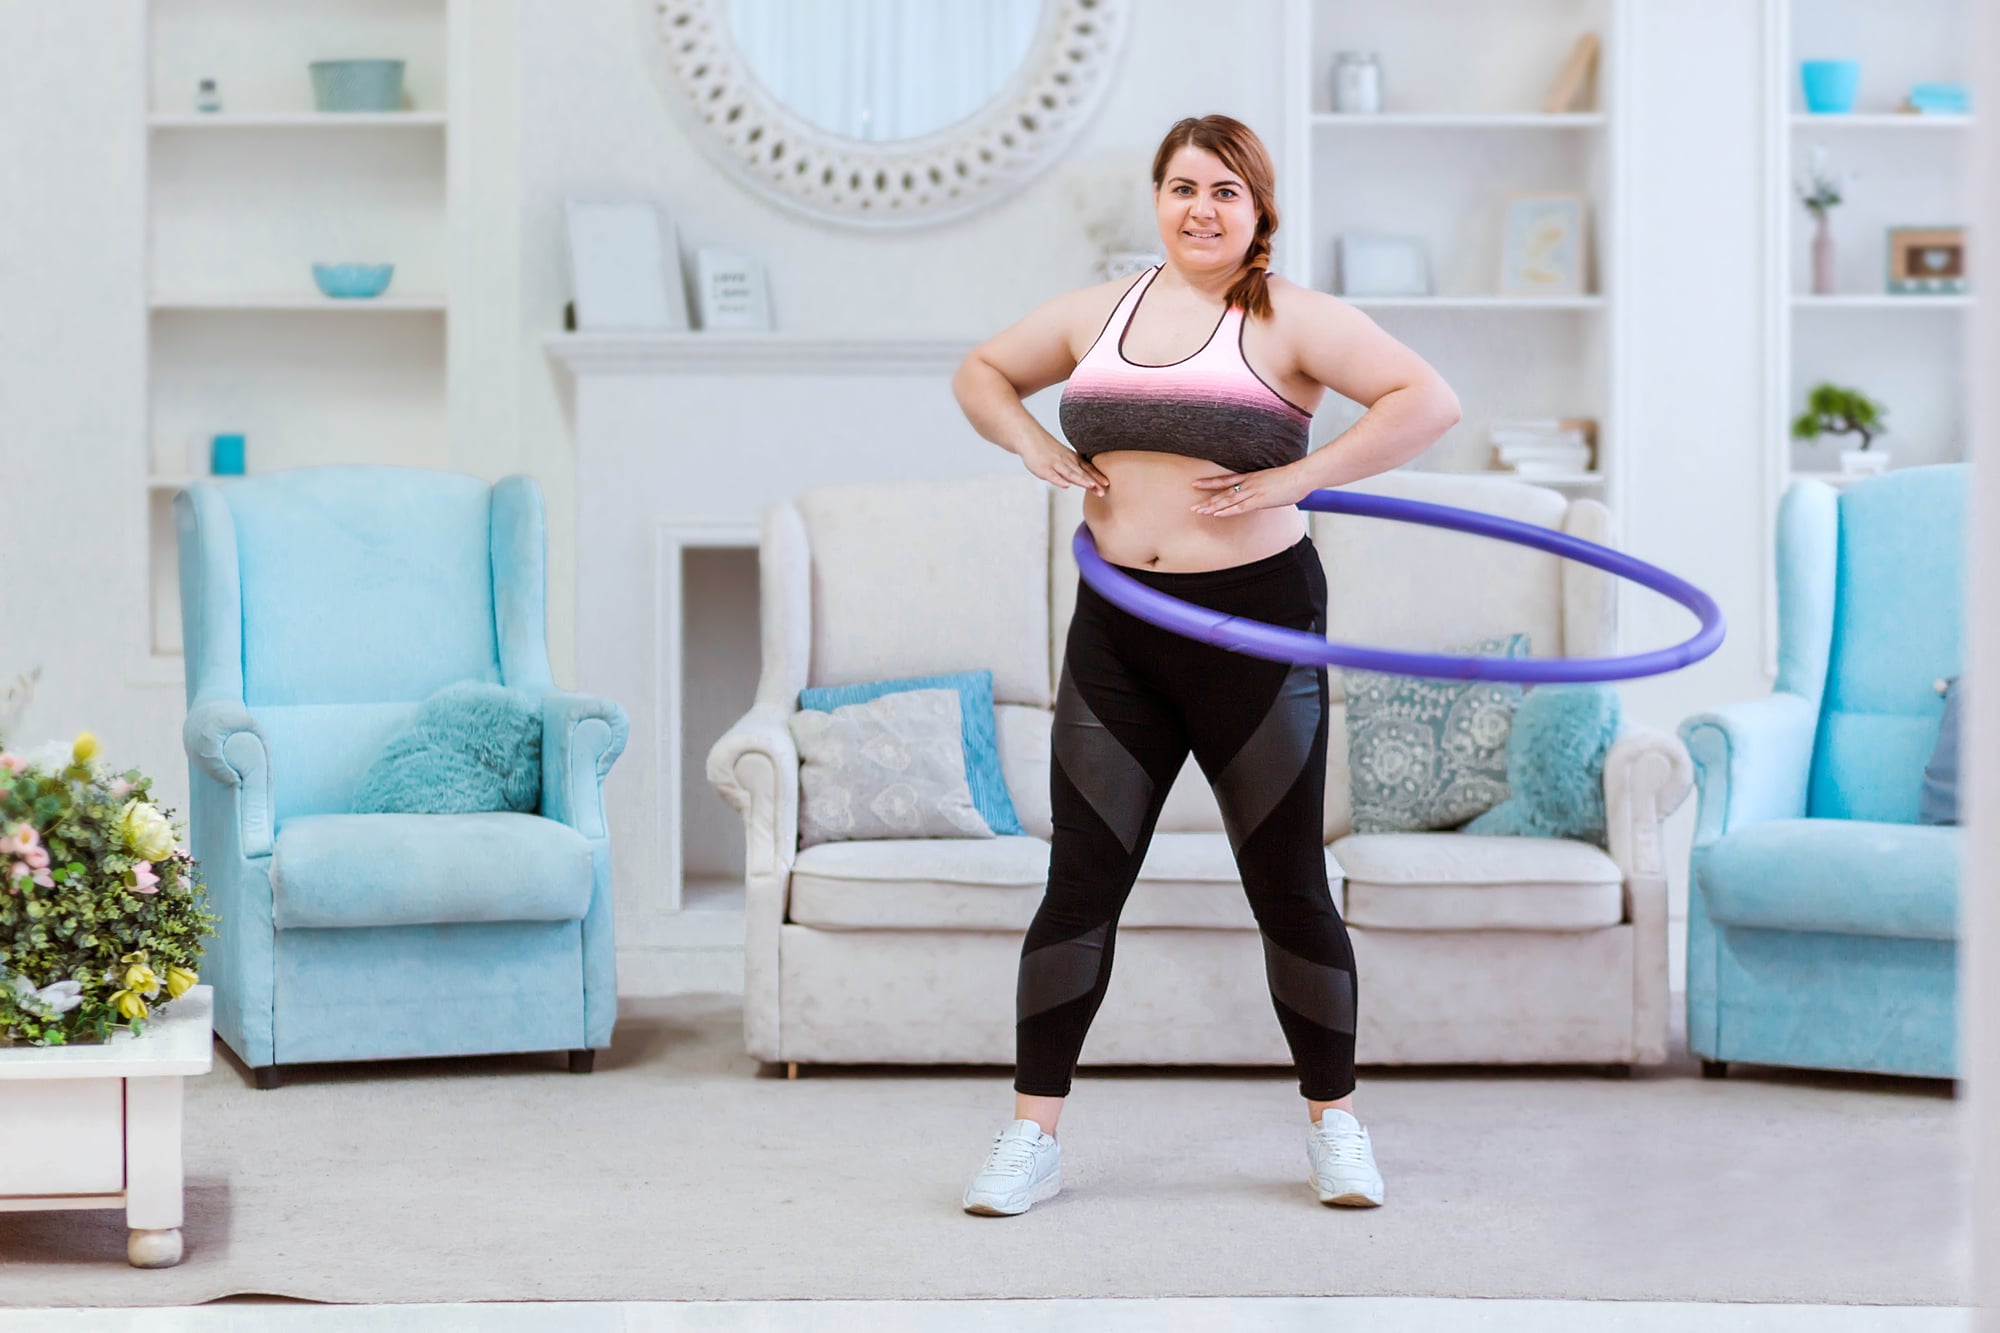 A plus-size woman exercising with a weighted hula hoop in her living room.